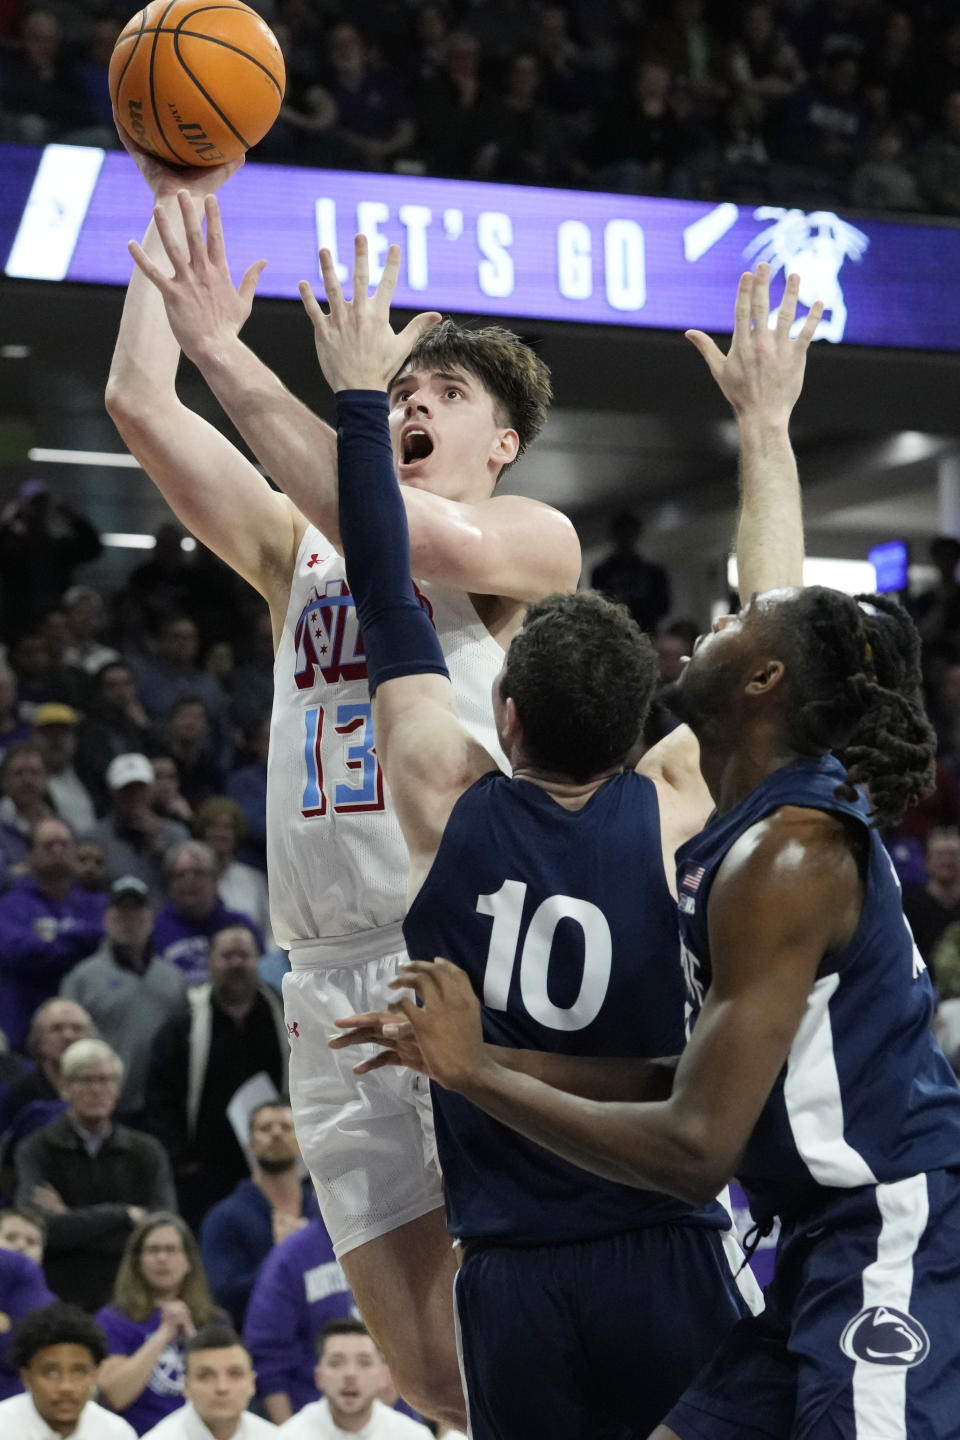 Northwestern guard Brooks Barnhizer (13) drives to the basket against Penn State guard Andrew Funk (10), and guard Evan Mahaffey (12) during overtime of an NCAA college basketball game in Evanston, Ill., Wednesday, March 1, 2023. Penn State won 68-65. (AP Photo/Nam Y. Huh)